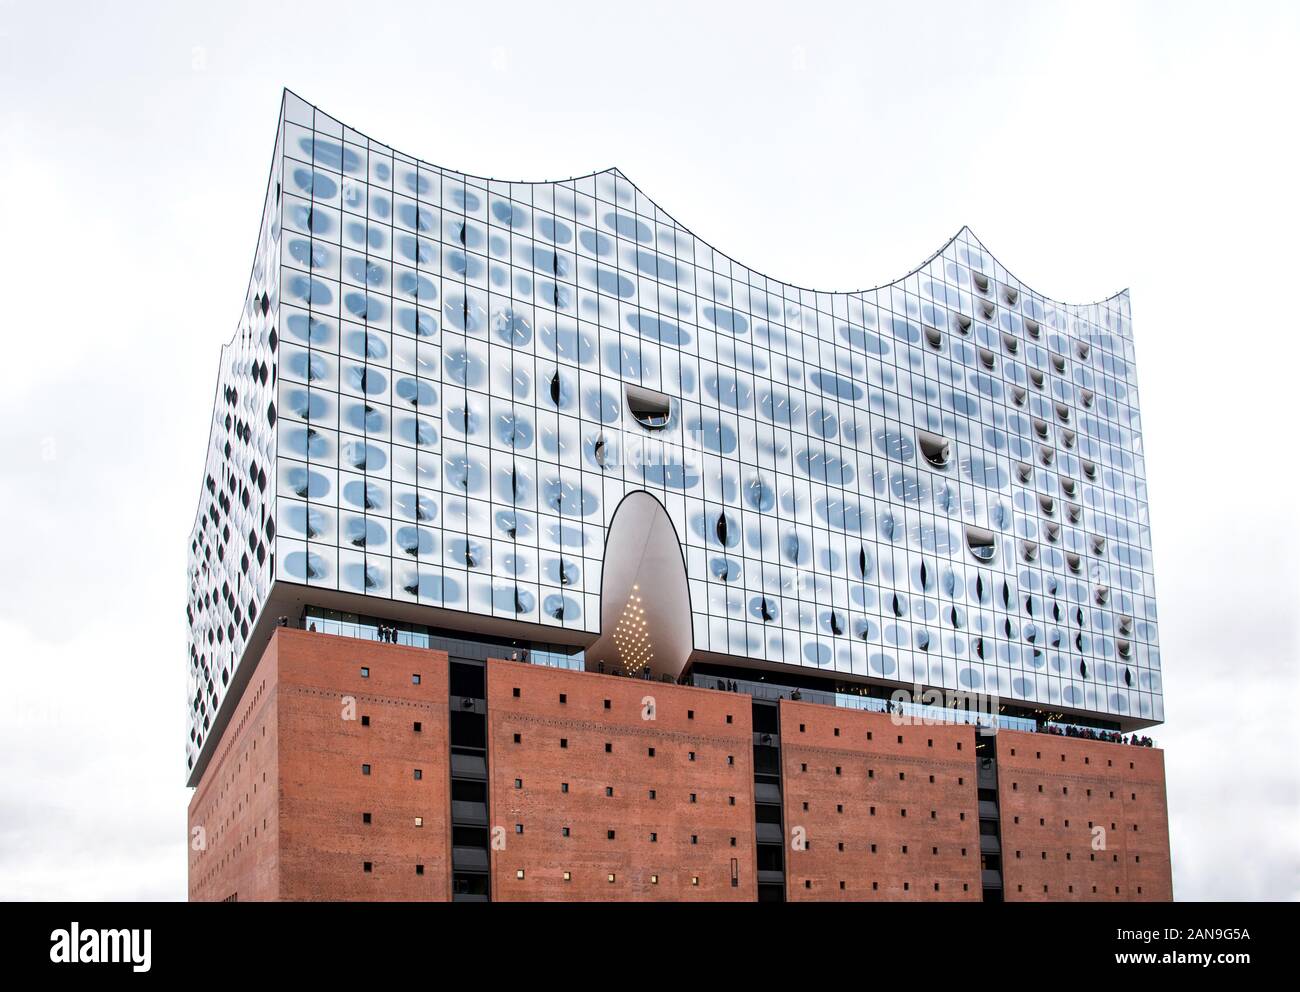 Low angle view of Elbphilharmonie or Elbe Philharmonic Hall in Hamburg, Germany, on a cloudy day Stock Photo